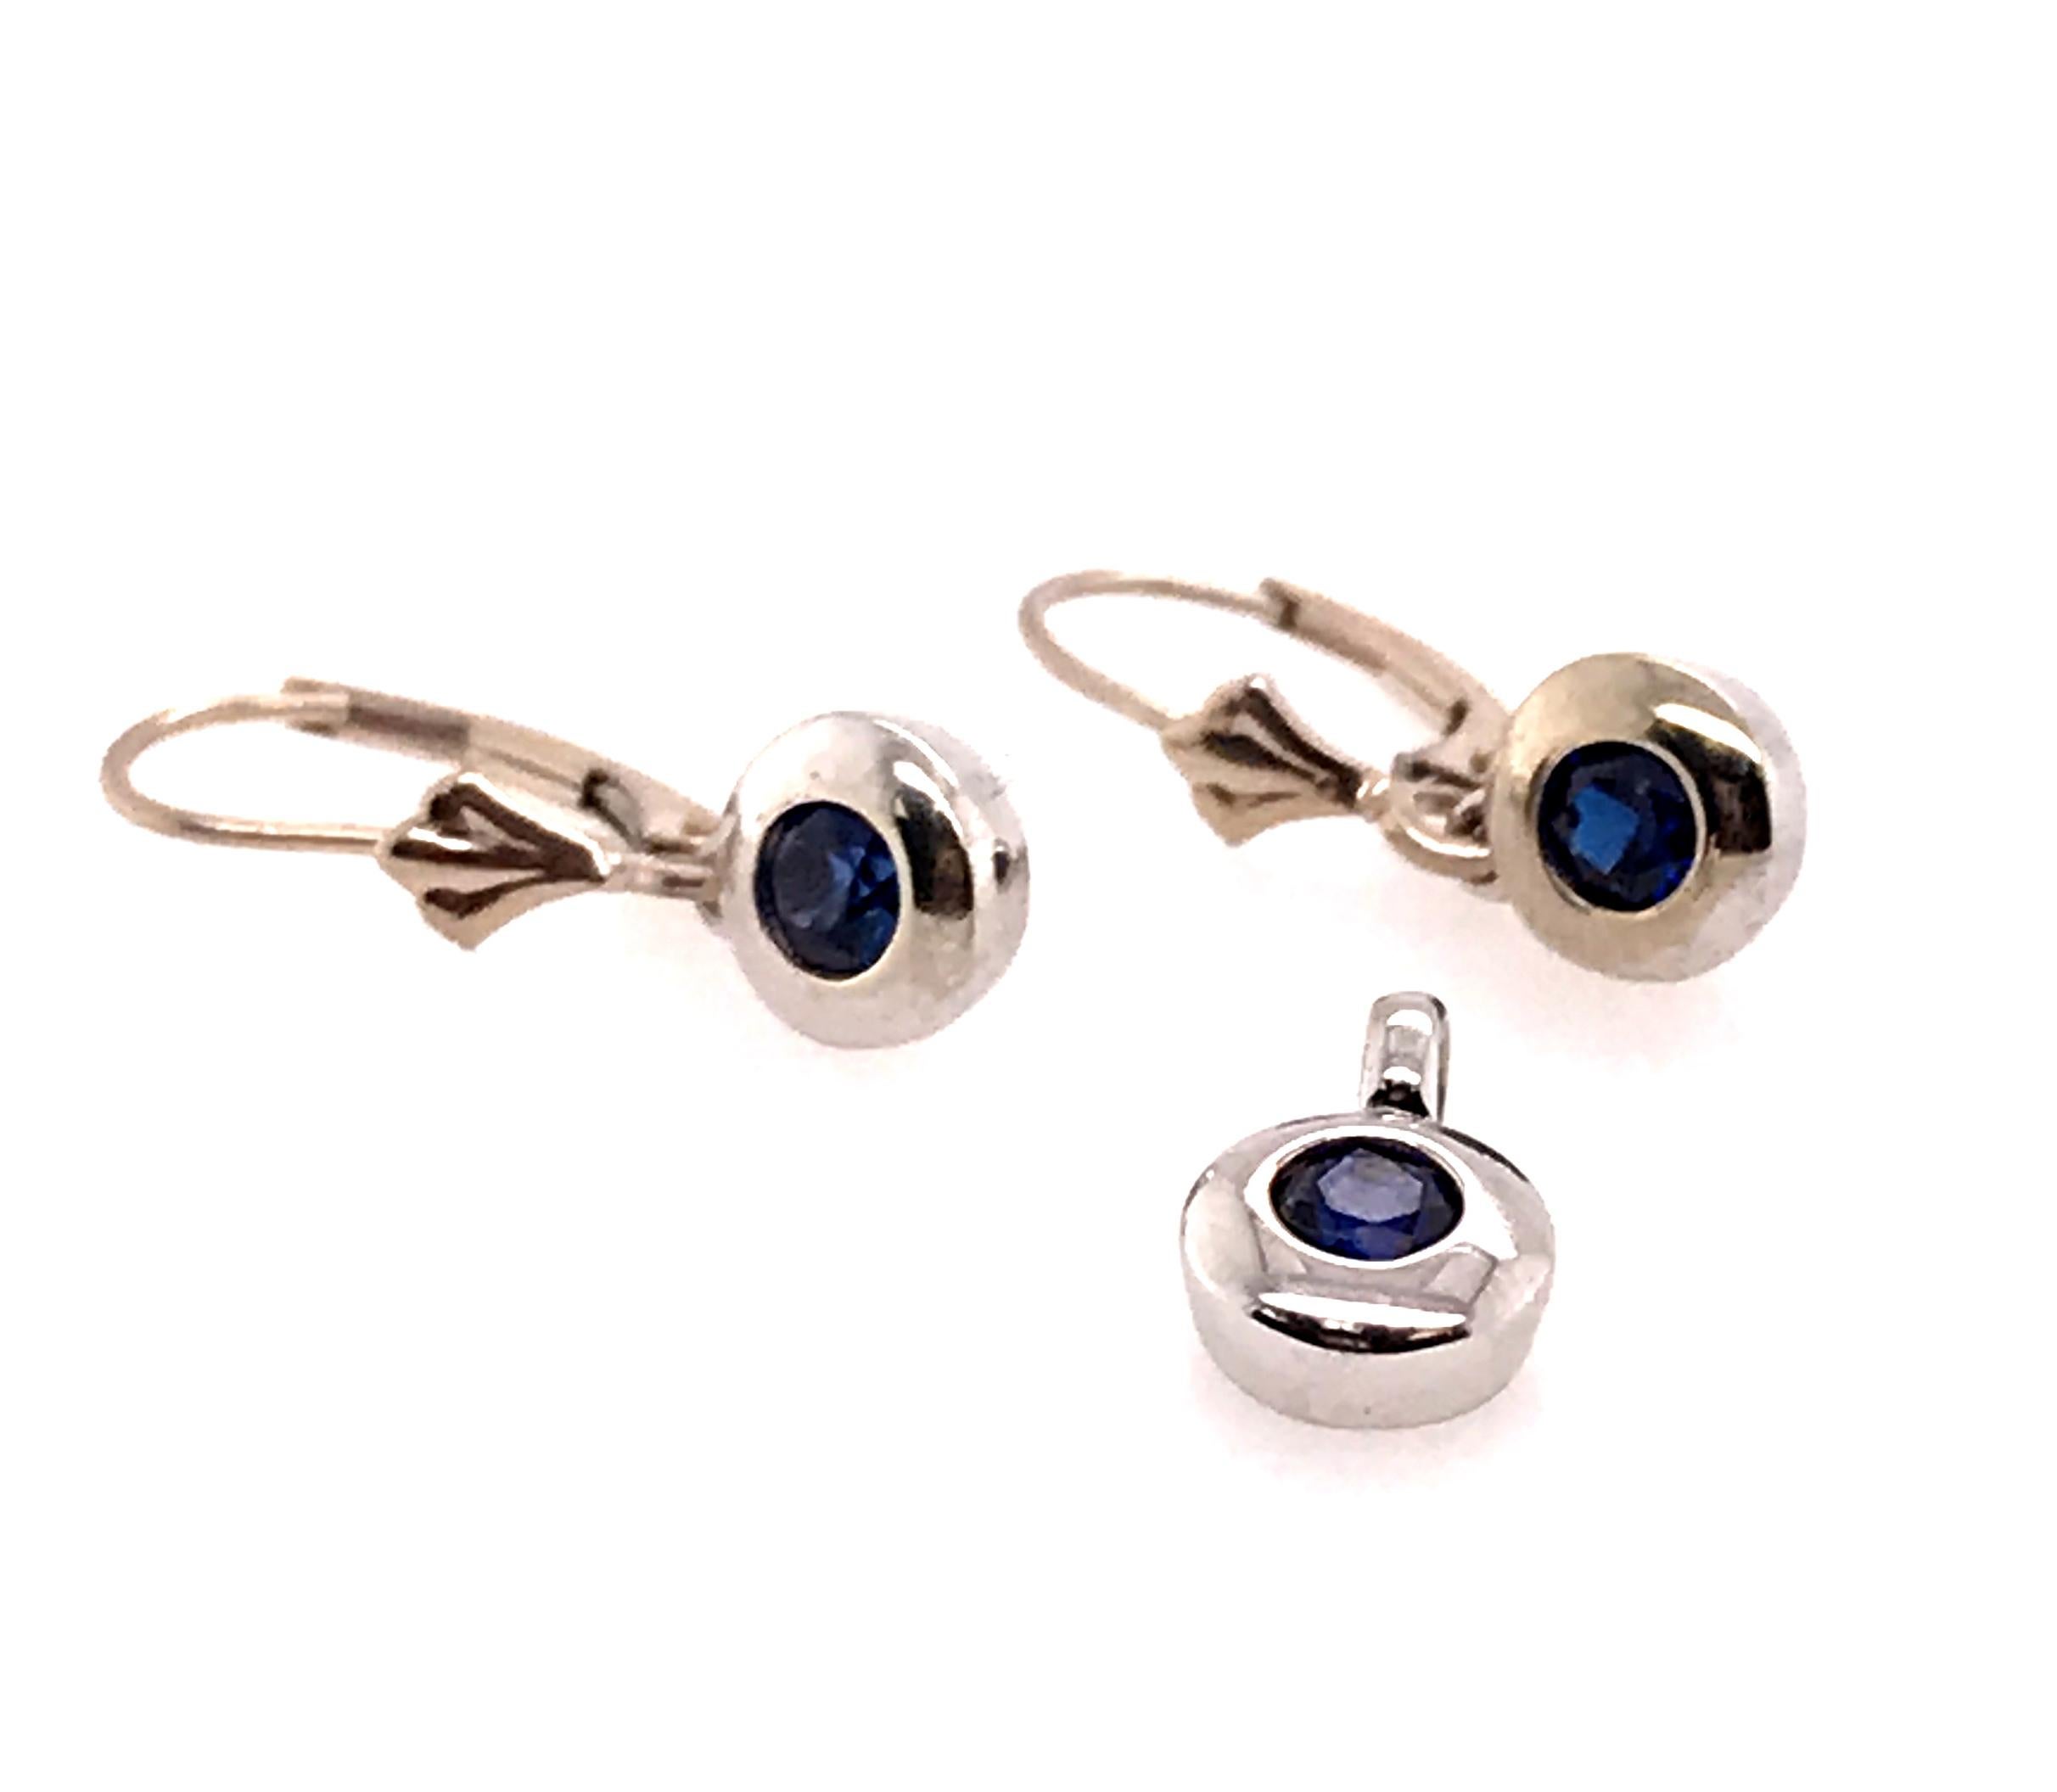 Sapphire White Gold Earrings Necklace Pendant Set 1.00ct Birthstone



100% Natural Gemstones

1.00 Carat Gemstone 

Solid 10K White Gold

Simple Yet Elegant 

Great Gift Idea 

Guaranteed to Blow Her Away

Stunning and Simply

Perfect for Any